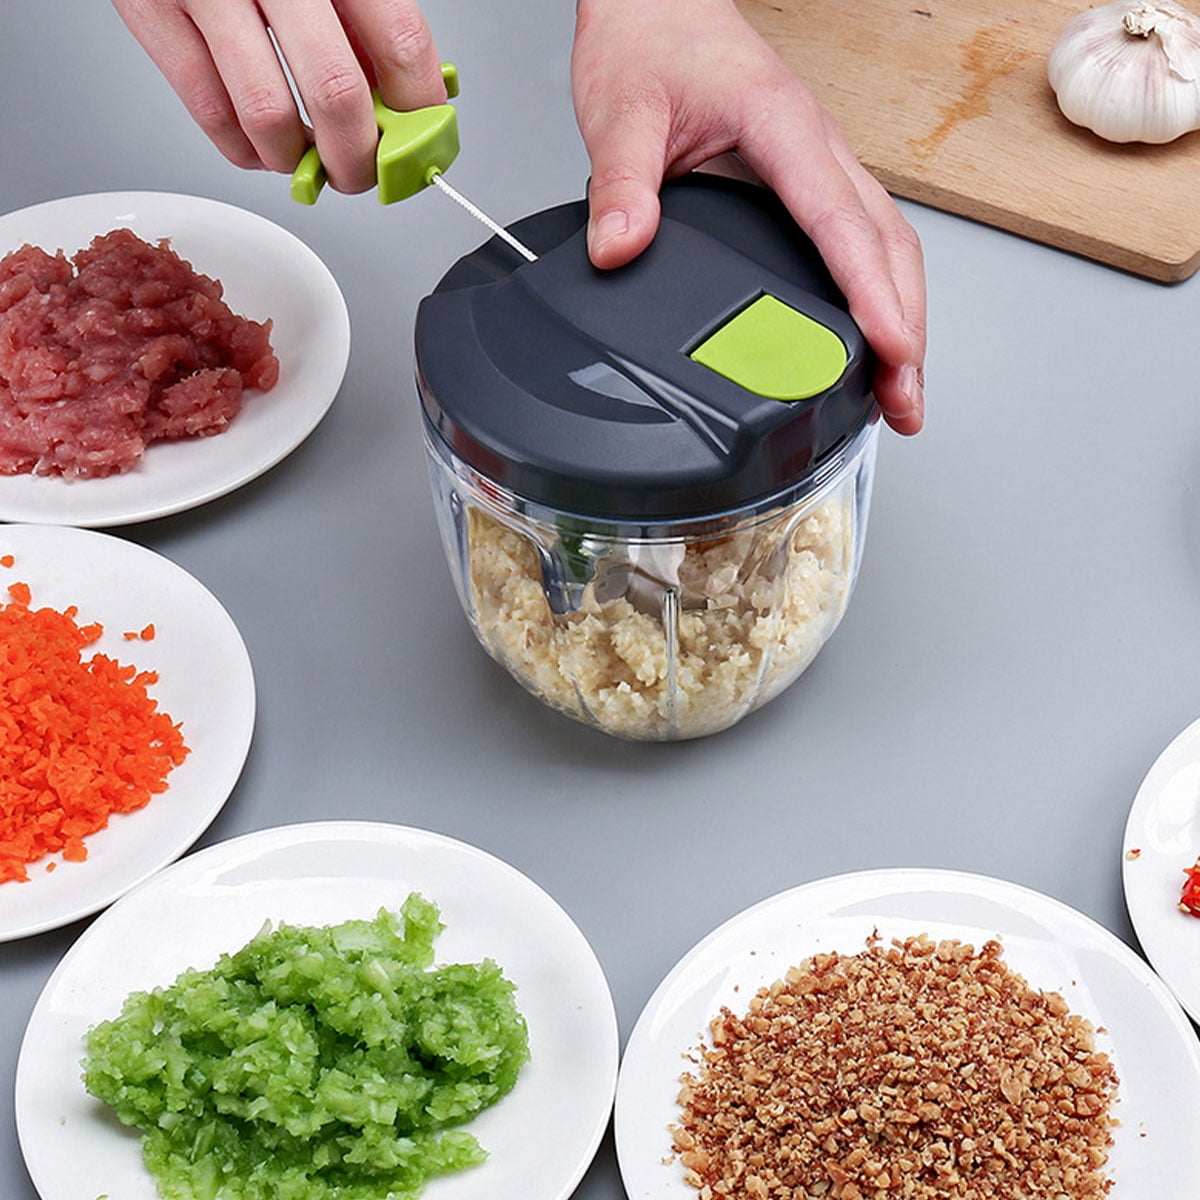 Manual Food Chopper: FILTA Hand Pull String Vegetable Chopper for Onion,  Garlic, Pepper, Nuts, Tomato, etc.,4.3 Cup.